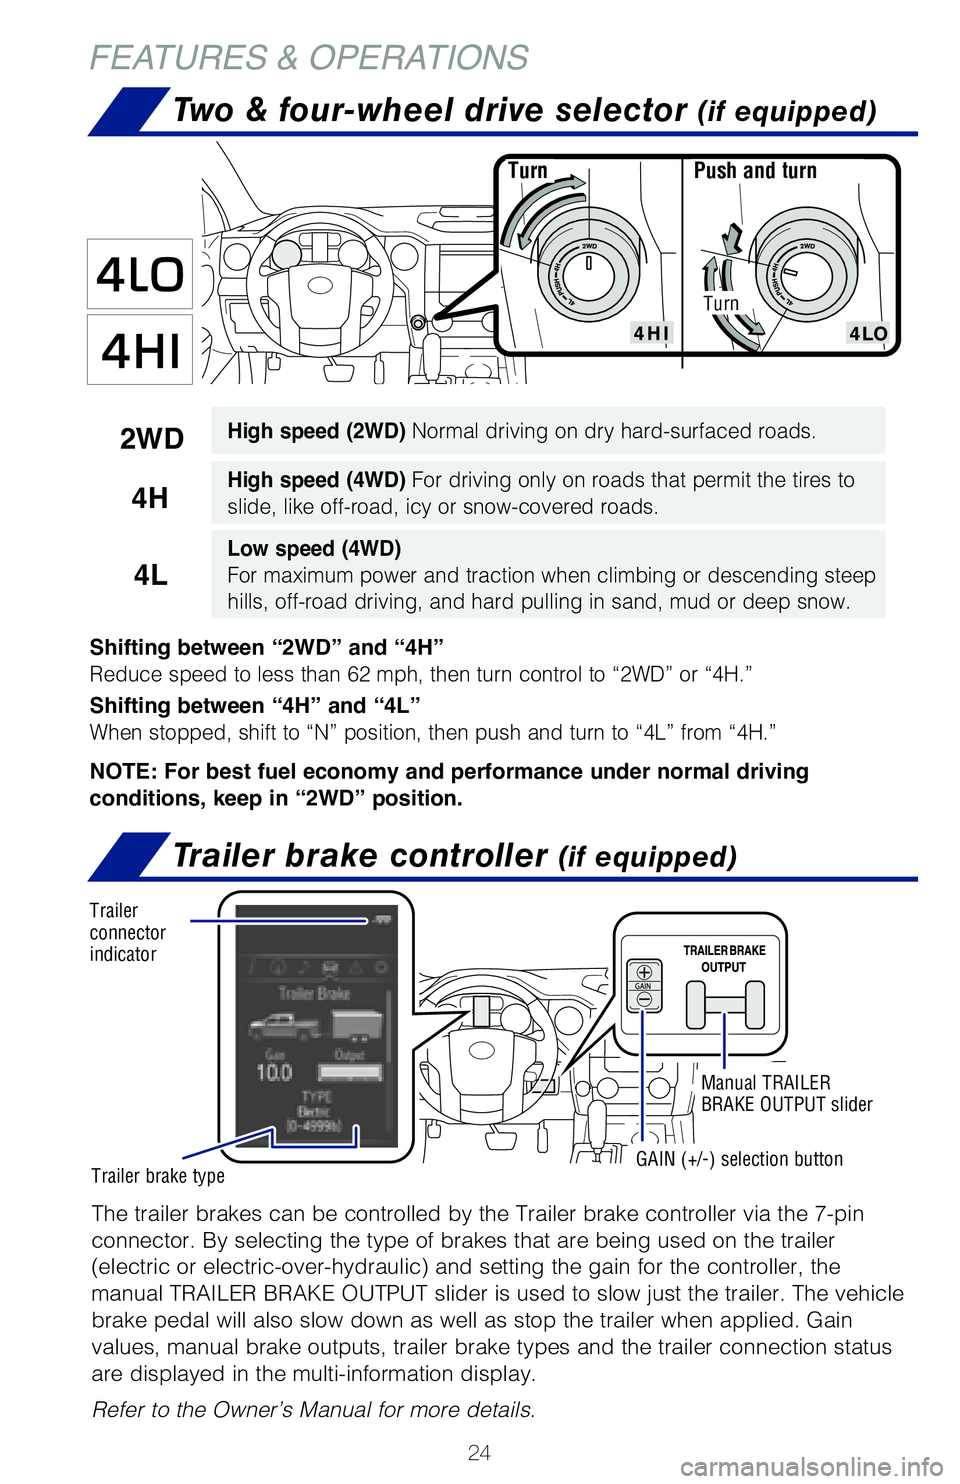 TOYOTA TUNDRA 2021  Owners Manual (in English) 24
FEATURES & OPERATIONS
Push and turnTurn
Shifting between “2WD” and “4H”
Reduce speed to less than 62 mph, then turn control to “2WD” or “\
4H.”
Shifting between “4H” and “4L�